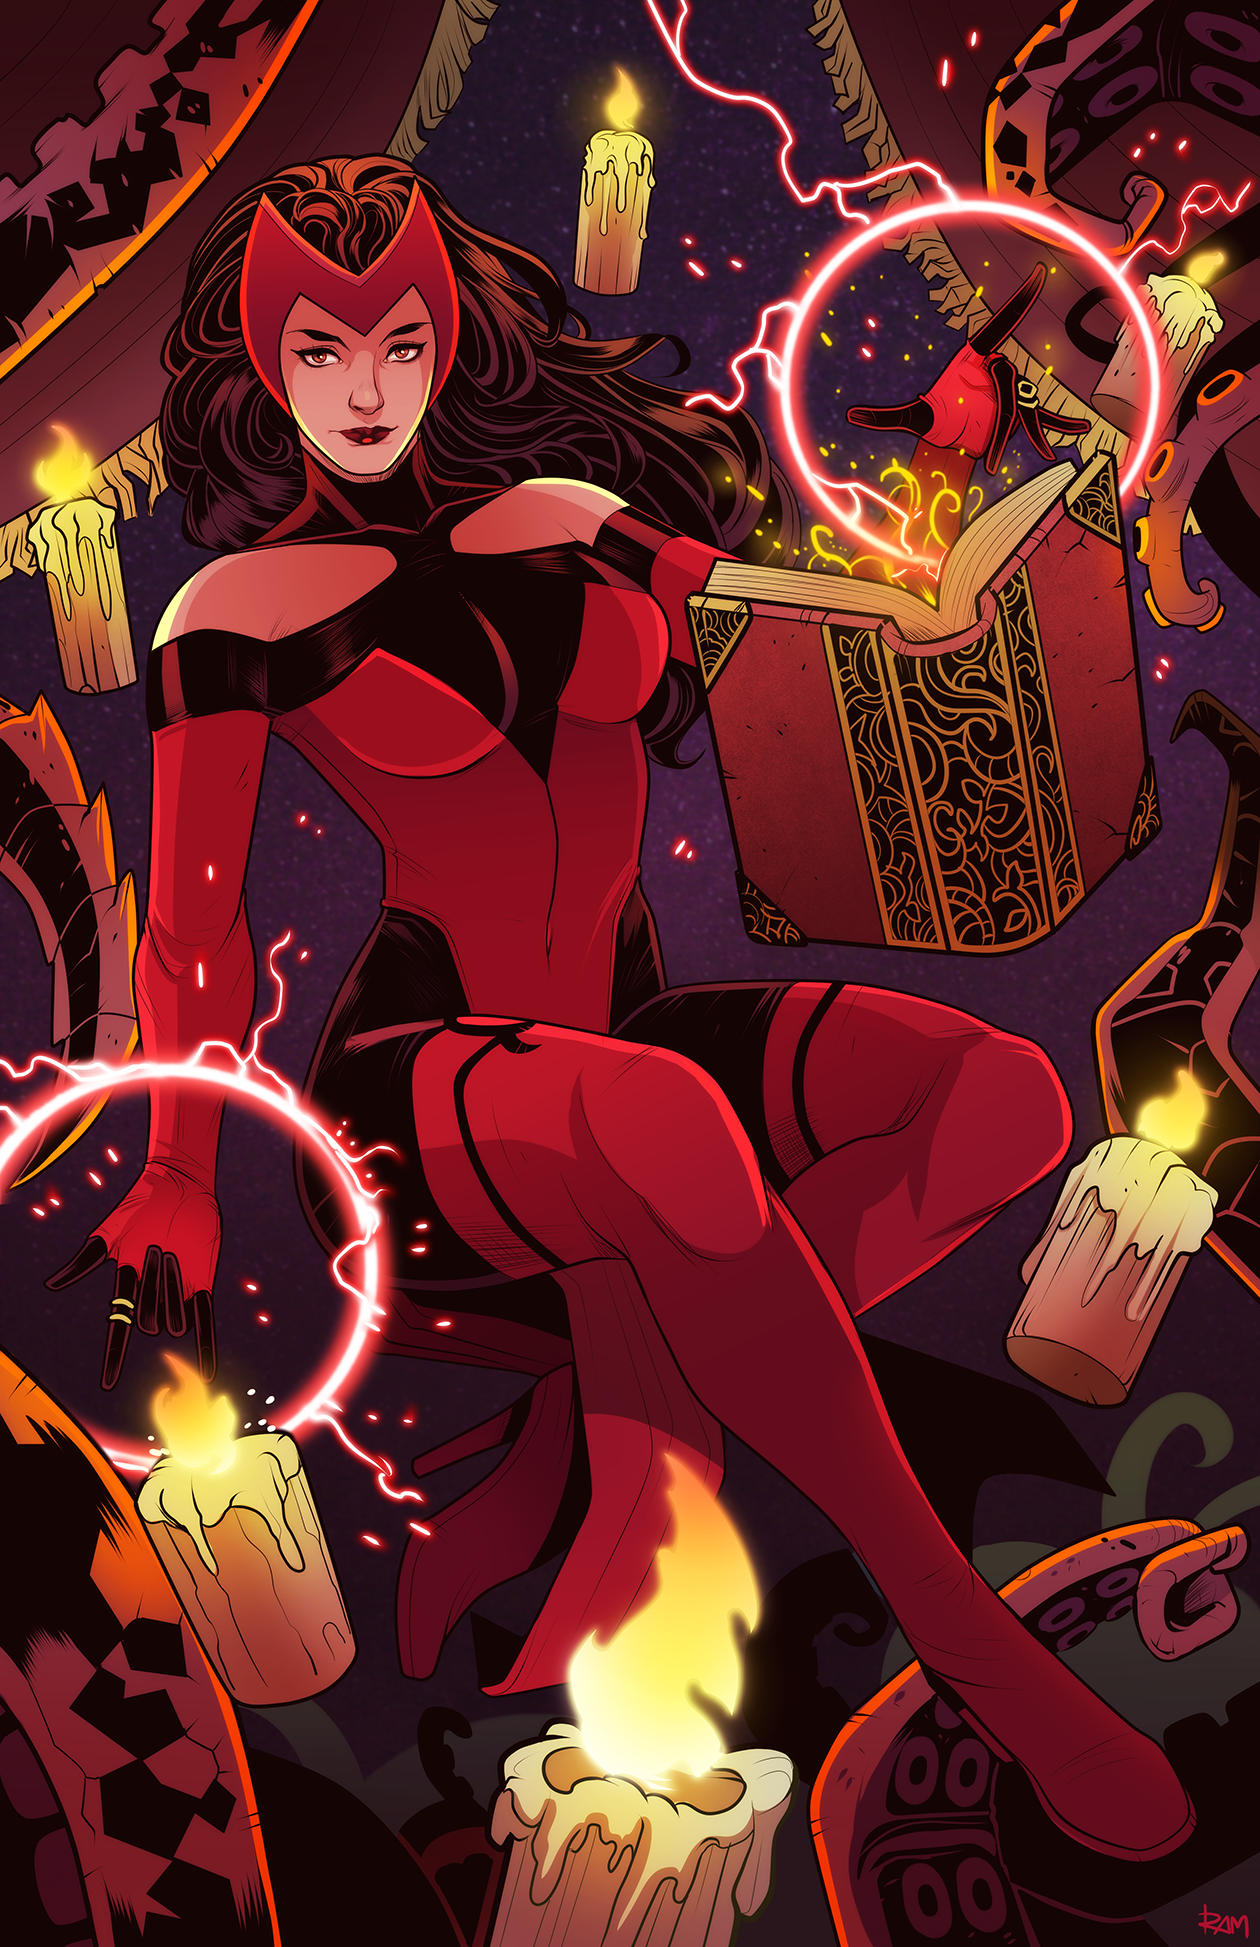 Scarlet Witch screenshots, images and pictures - Comic Vine